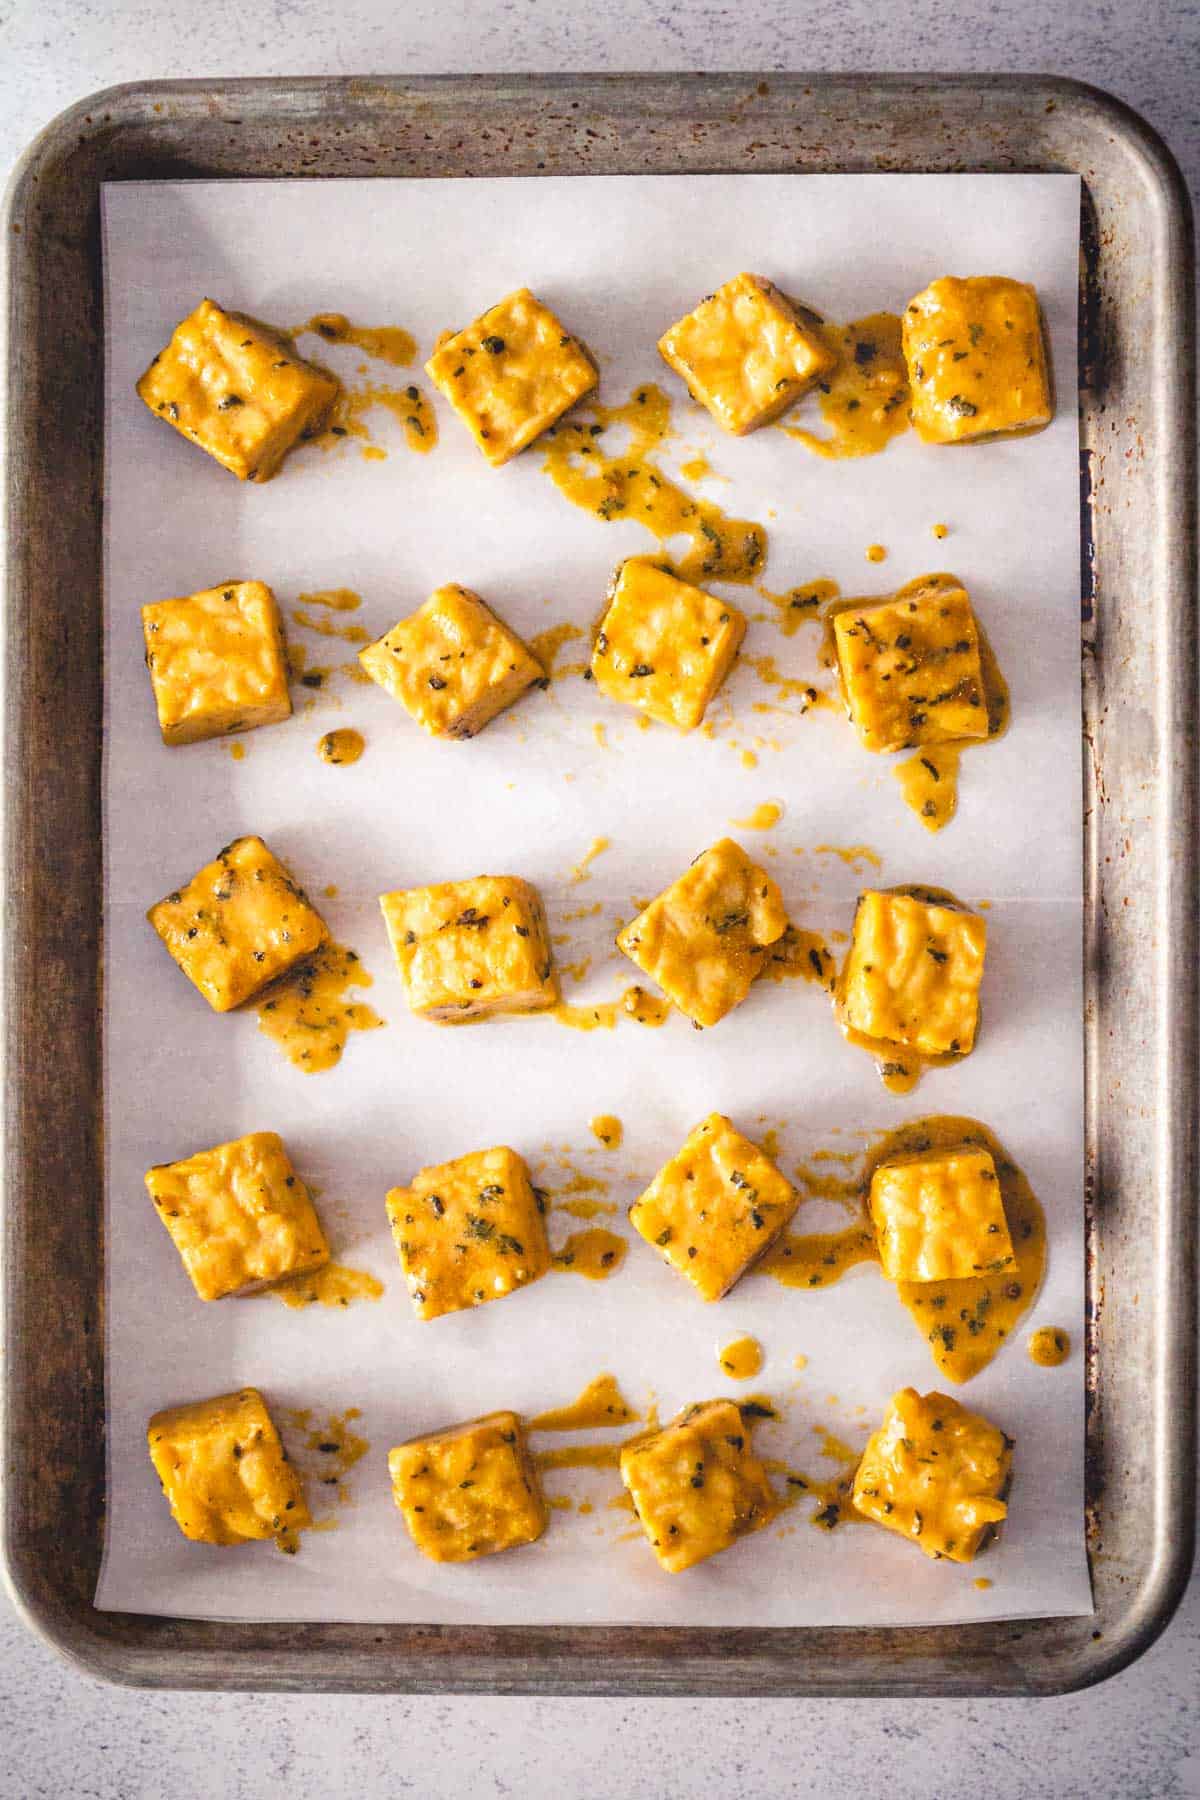 Marinated tempeh cubes spread on a sheet pan before baking.